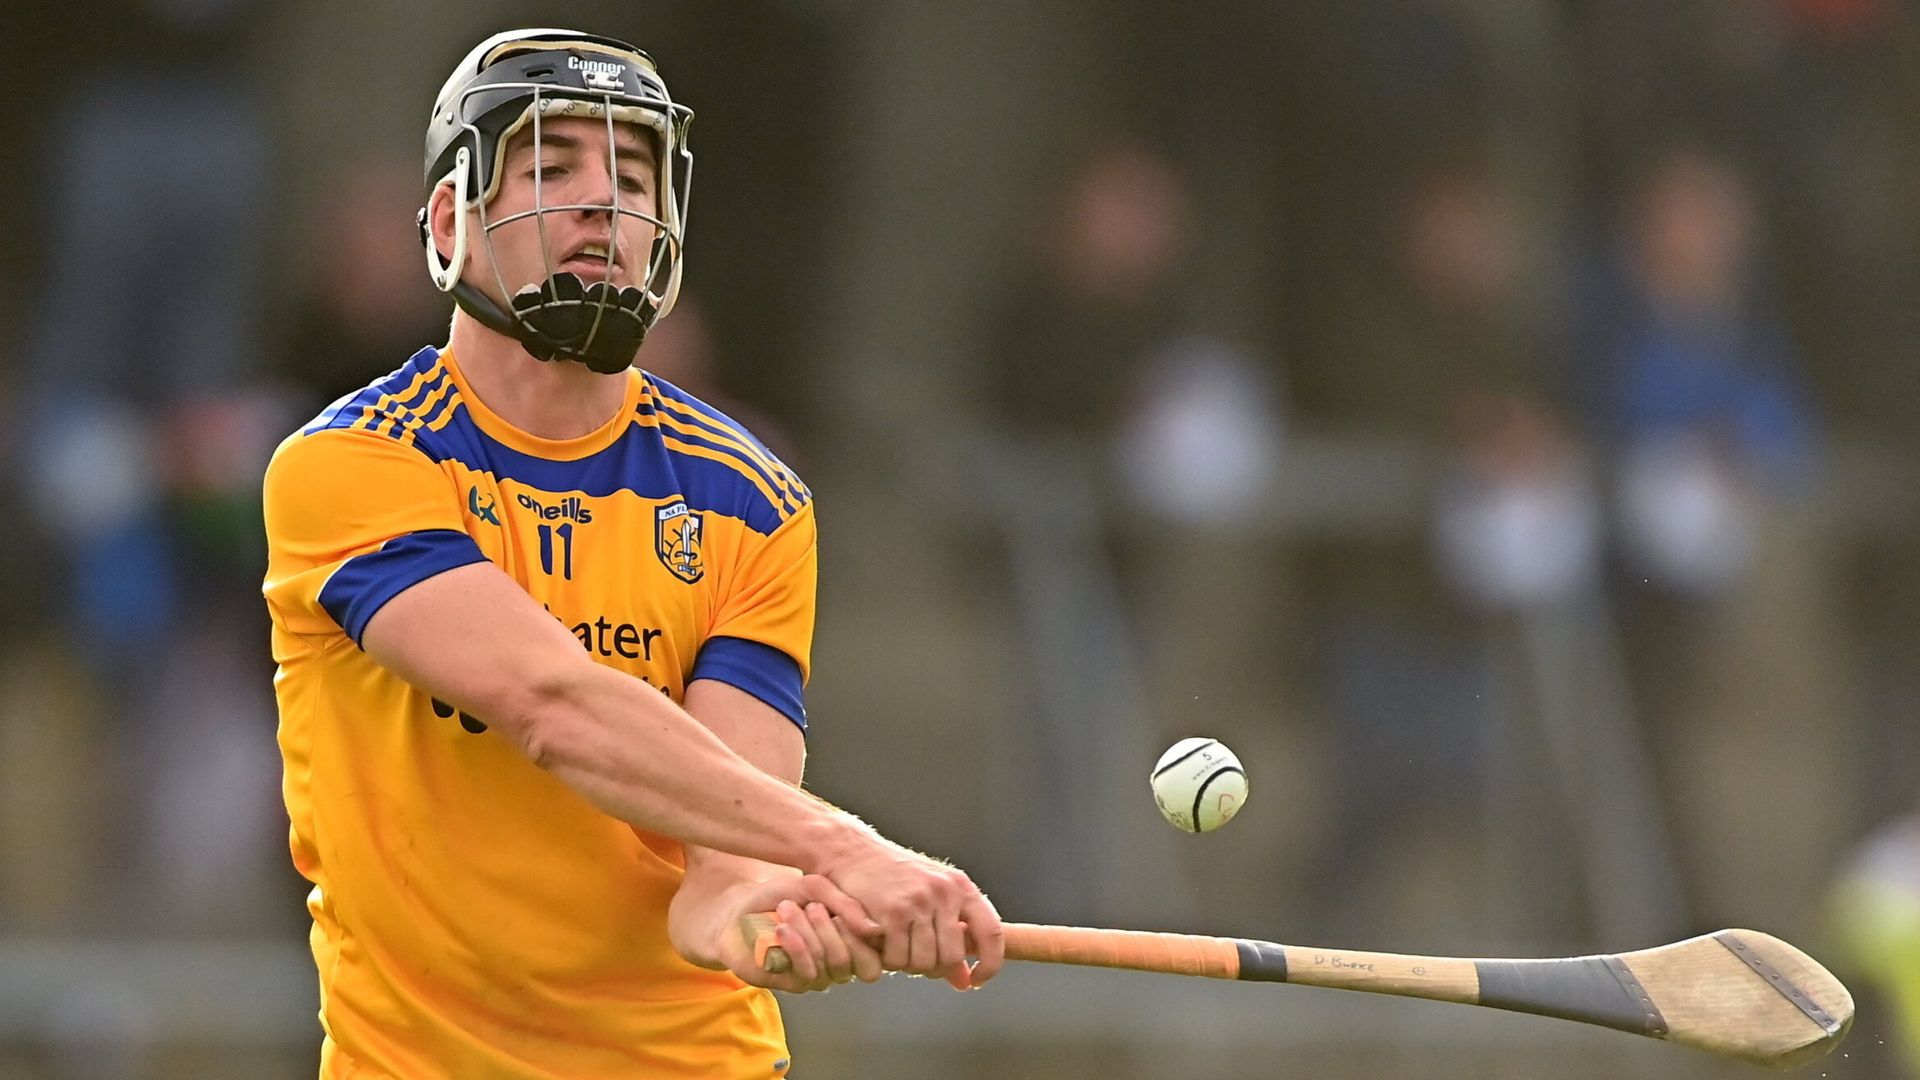 New kids on the block bidding to spoil Crokes' double-double